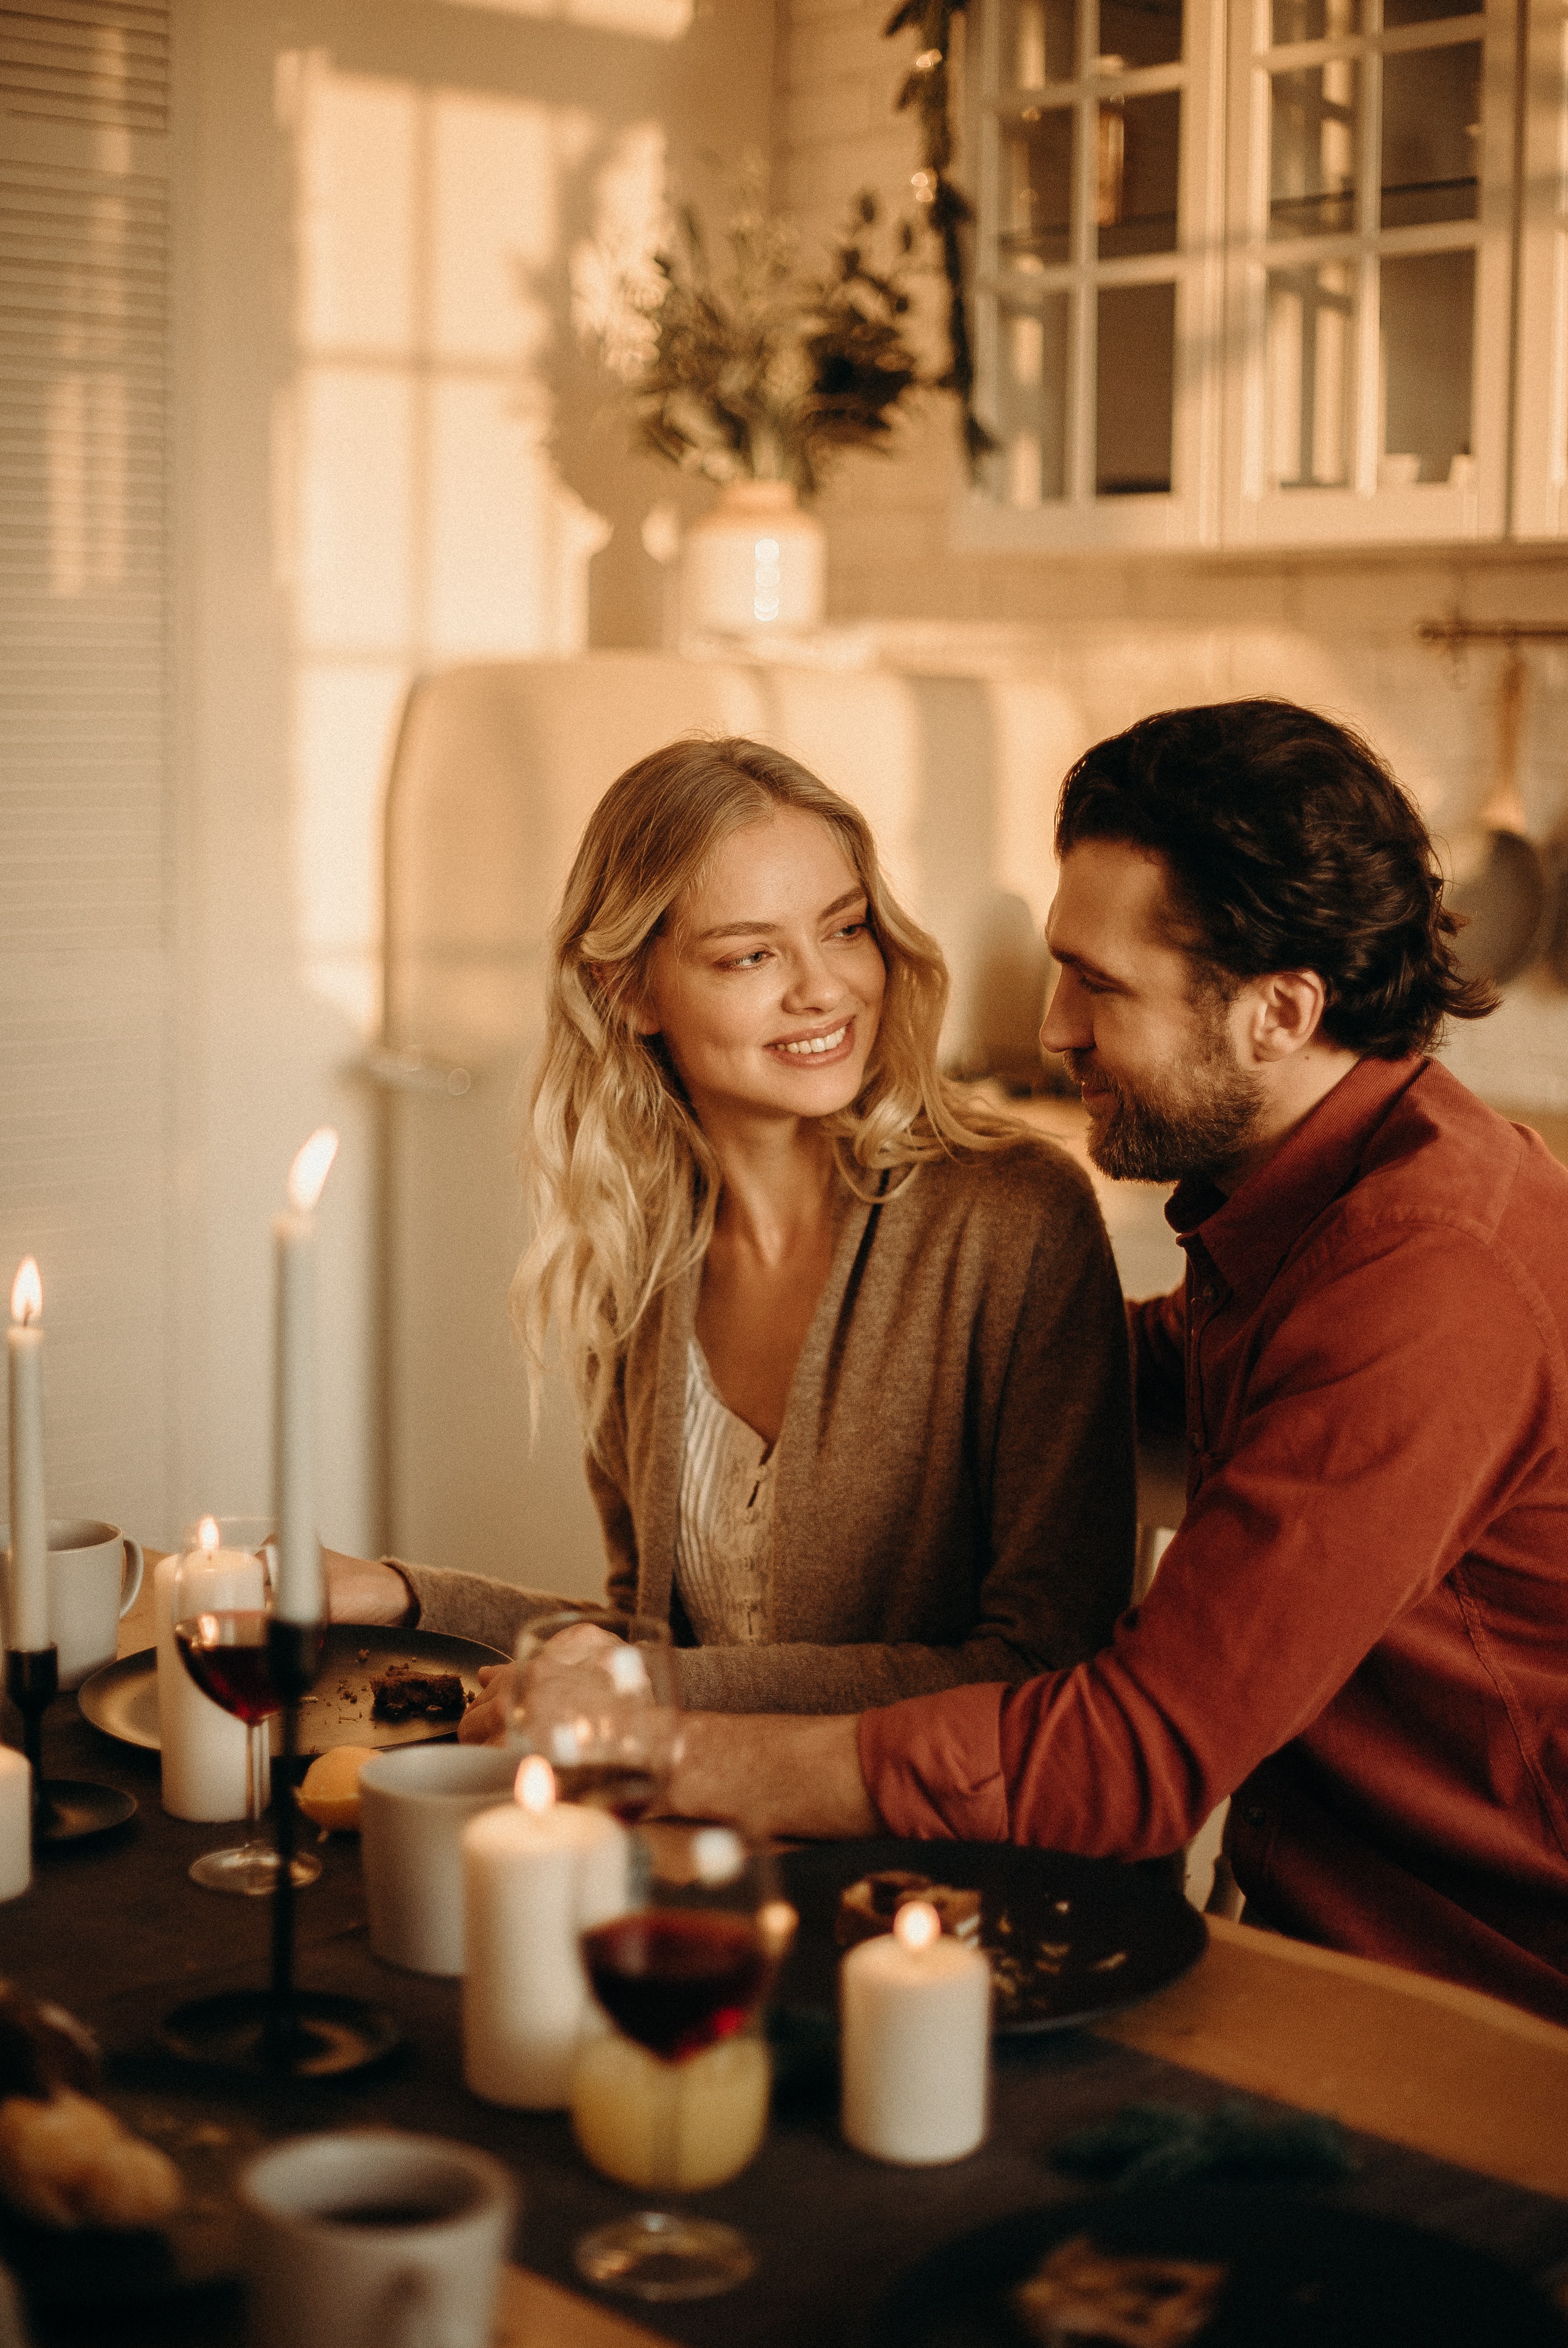 A couple having a candlelight dinner. | Source: Pexels